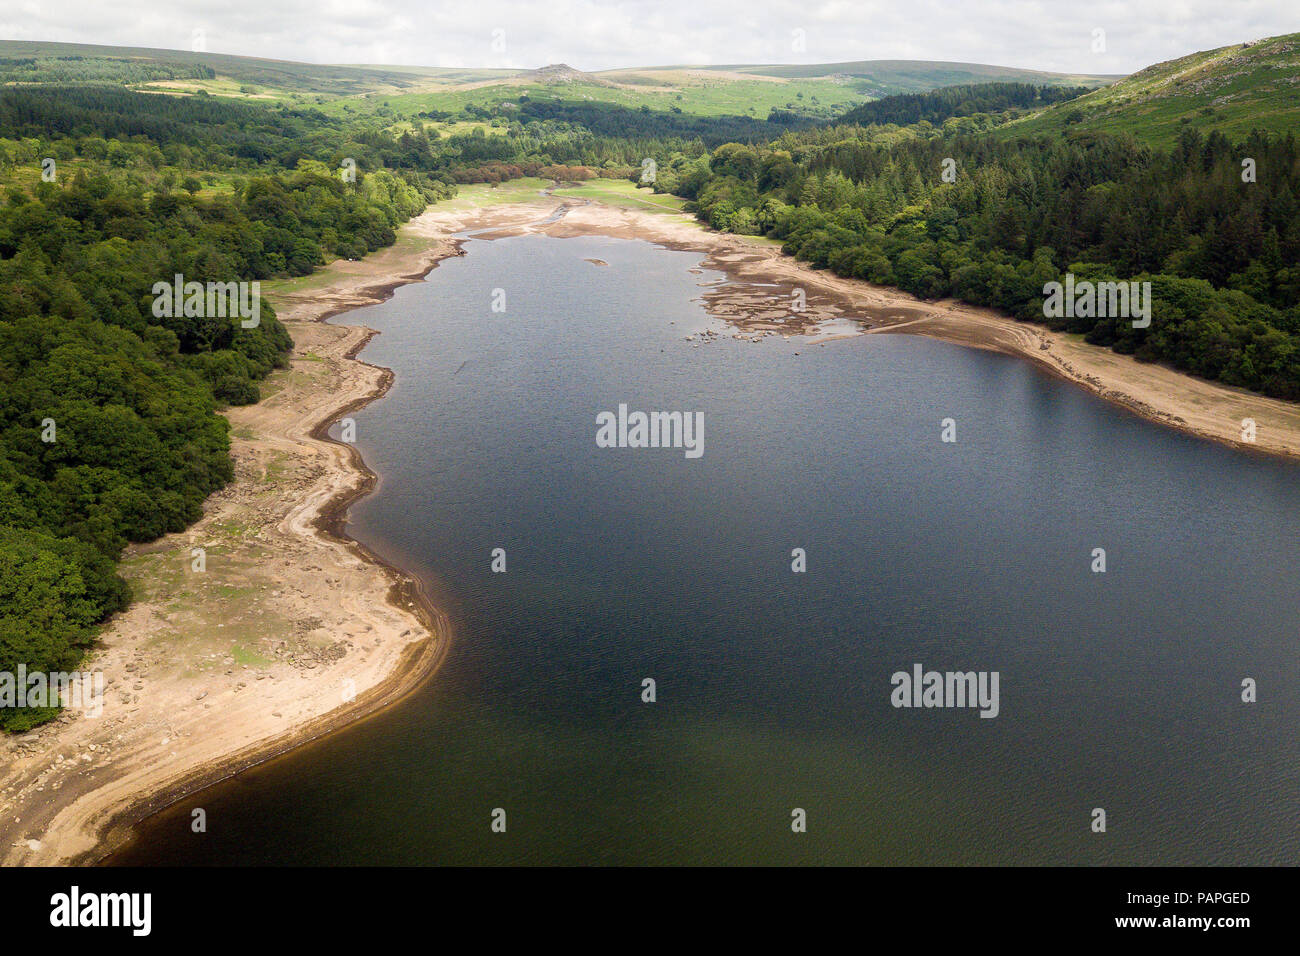 Water levels fall low at Burrator reservoir, Dartmoor, Devon, during the driest start to a summer since modern records began in 1961, as the region prepares to welcome millions of holidaymakers over the school summer break and South West Water is asking everyone to use water wisely. Stock Photo